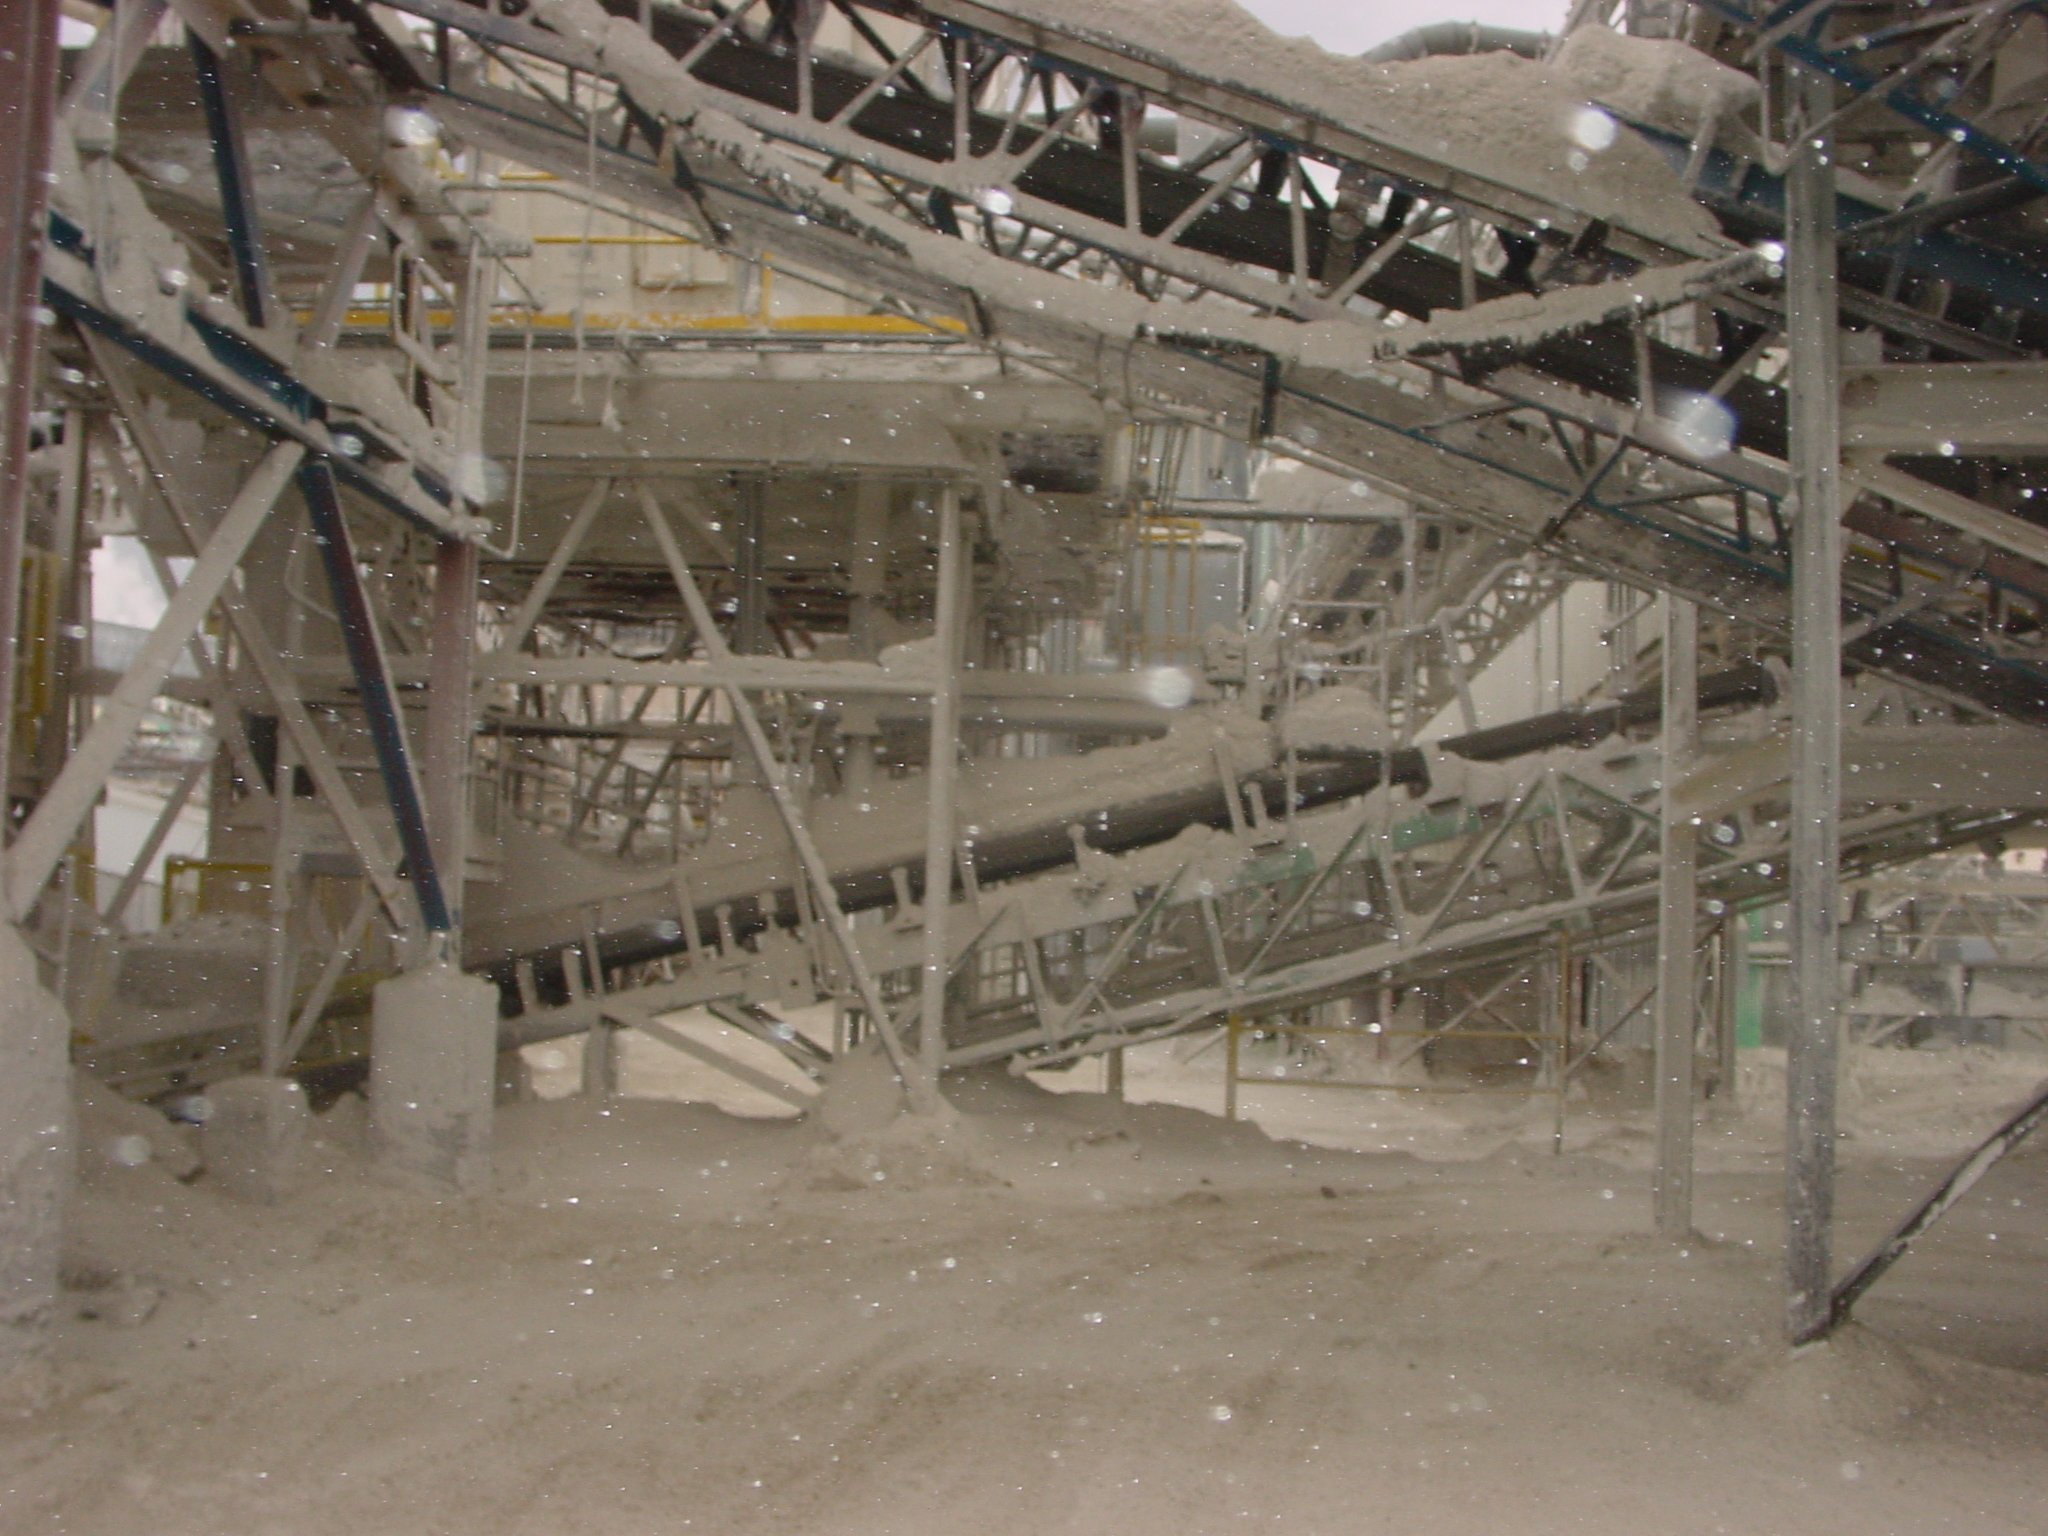 Belt conveyors, if not properly supported and sealed, can produce spillage and airborne dust